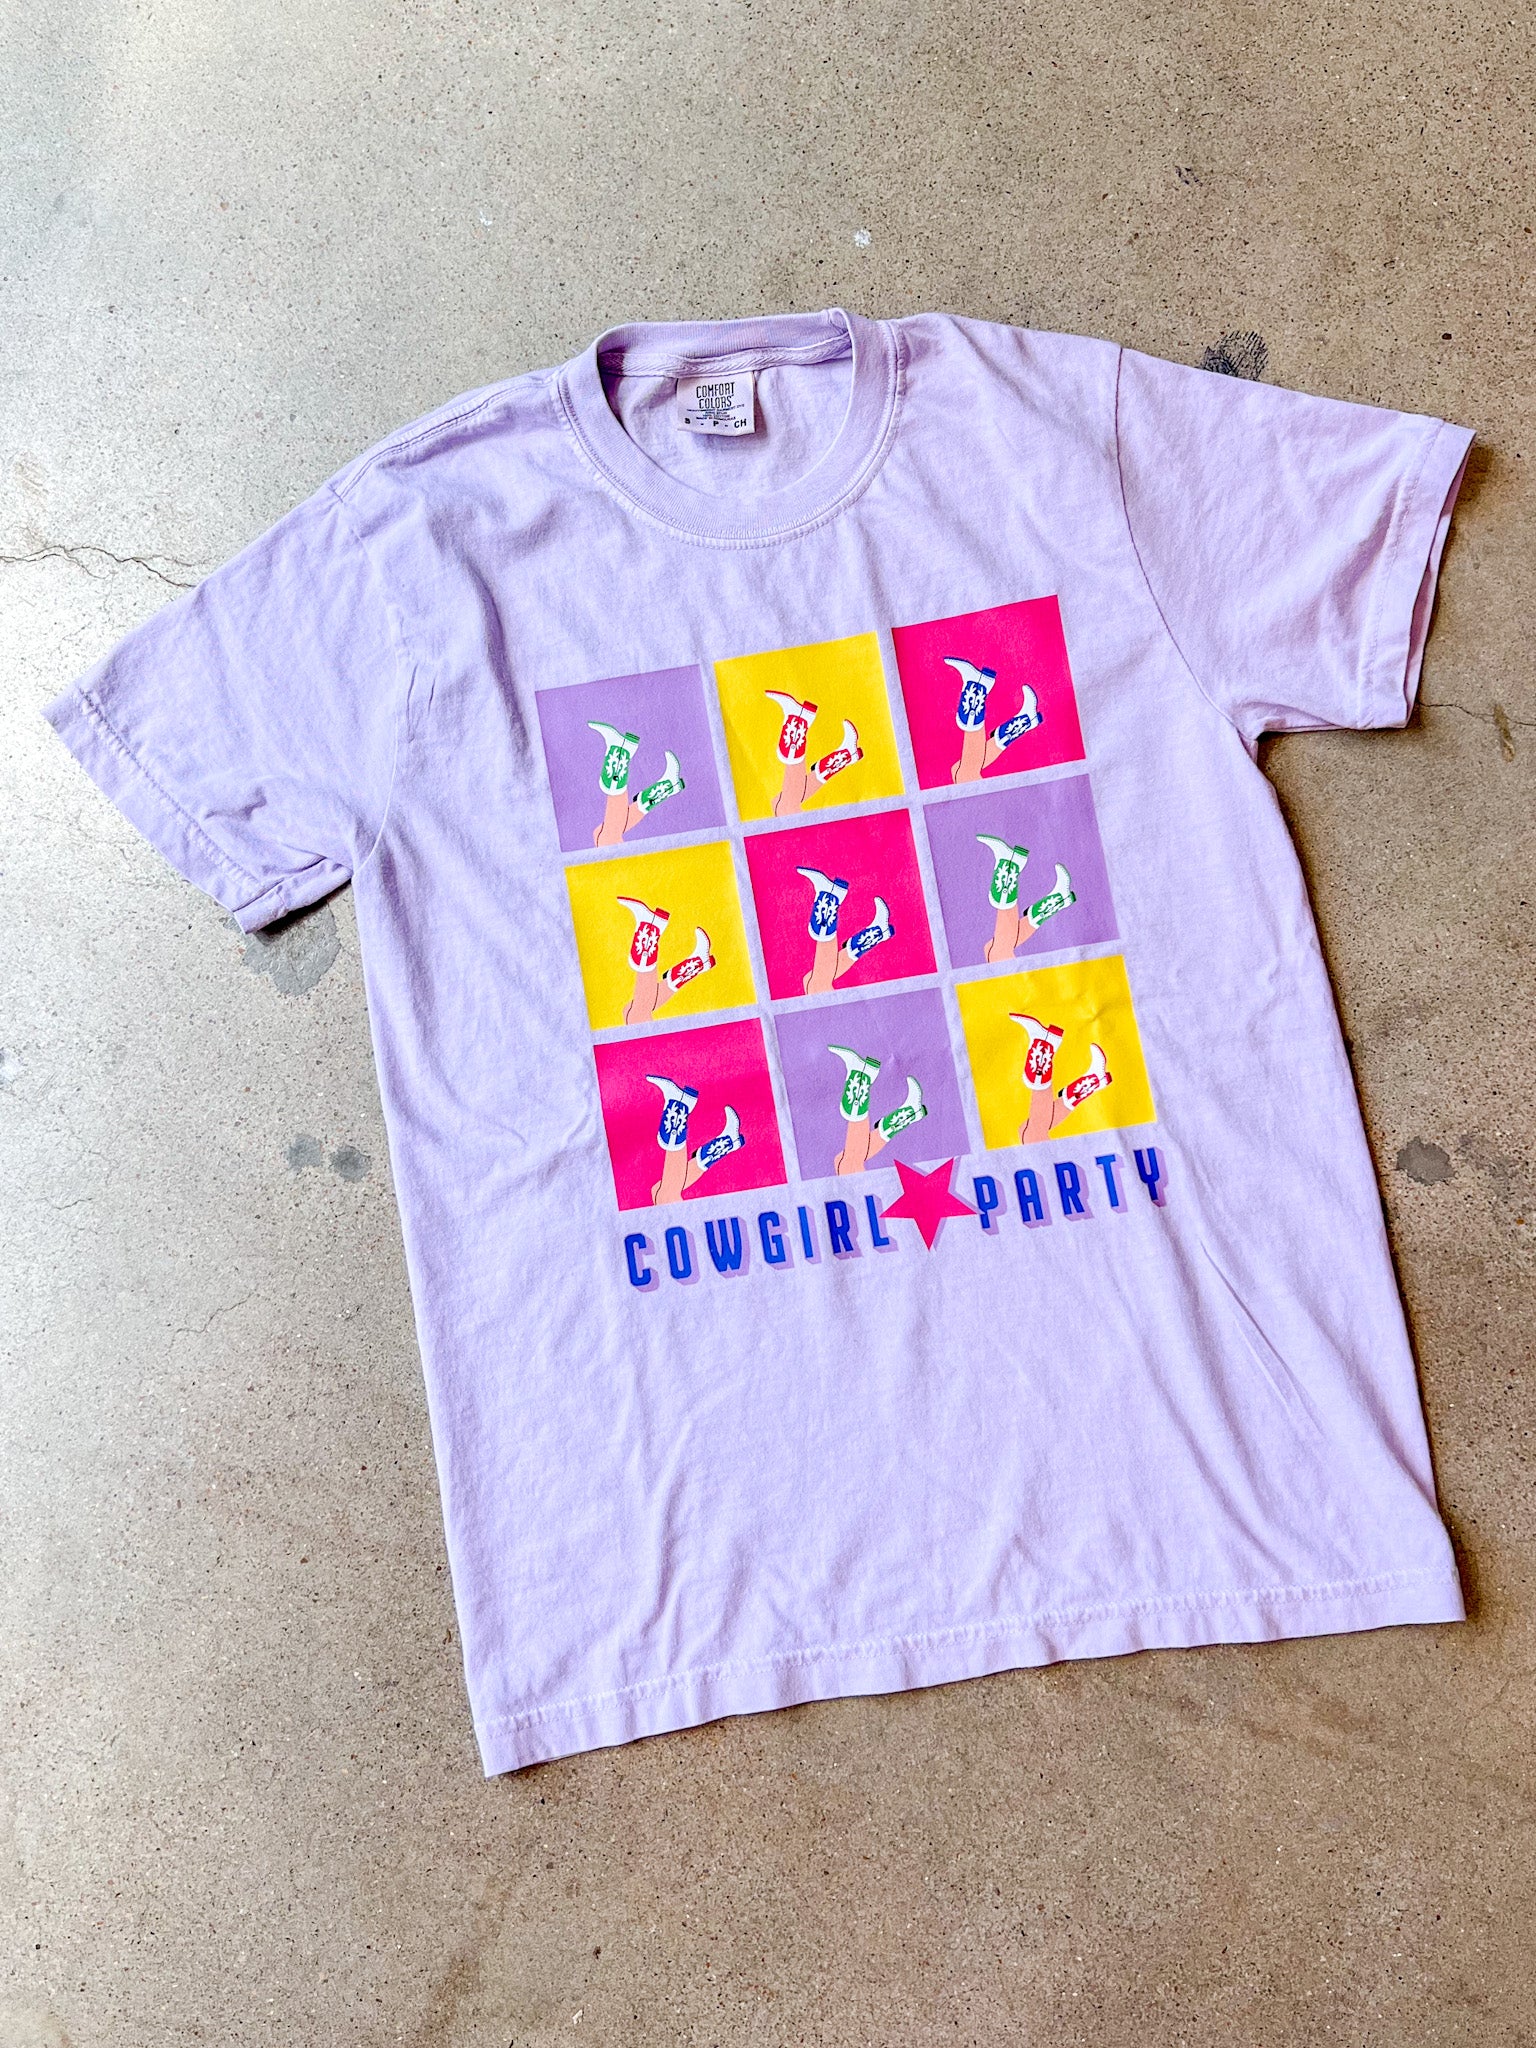 Cowgirl Party Tee